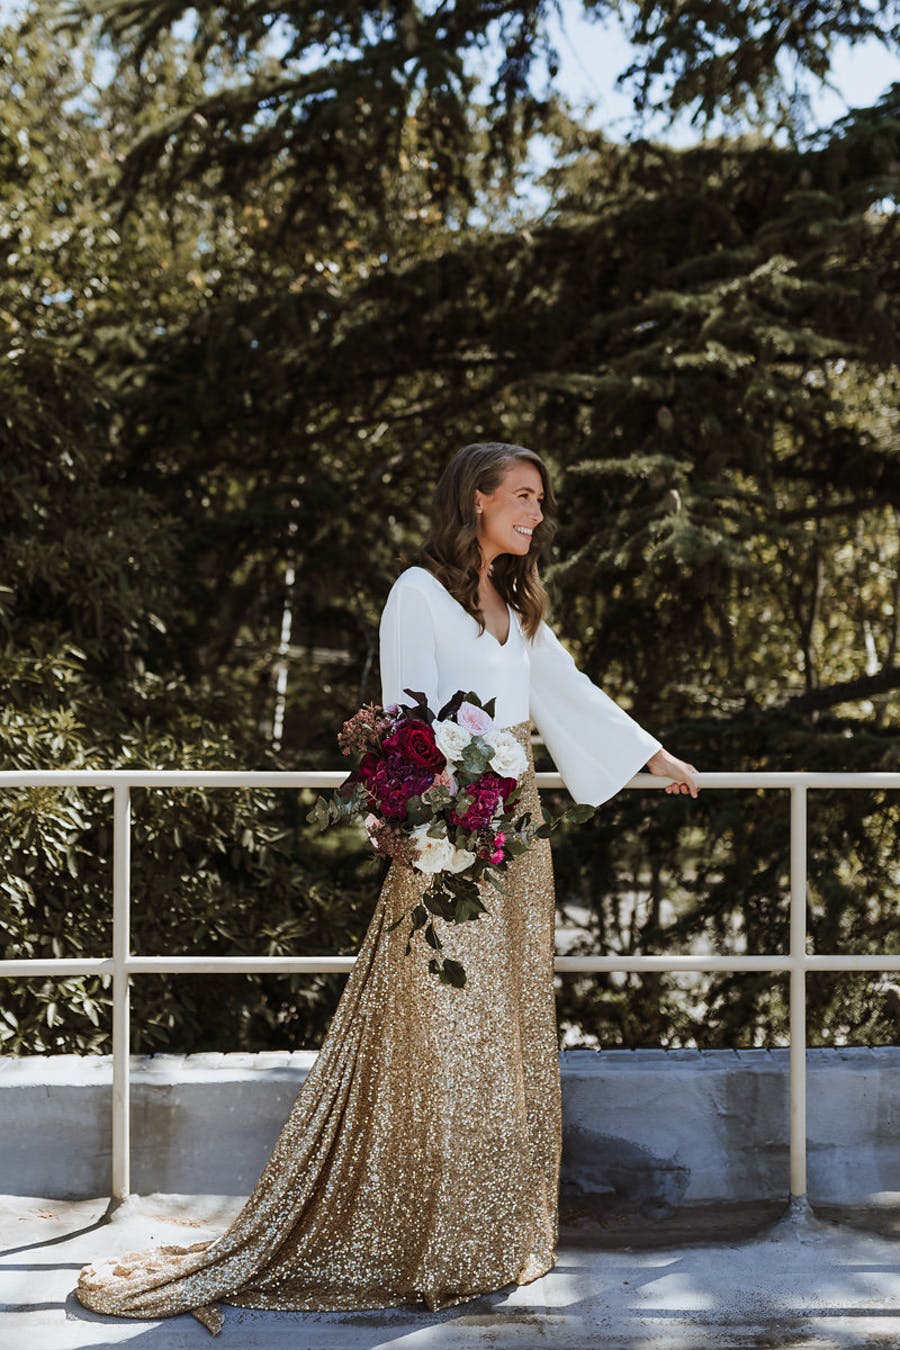 The second bride preferred a white top with bell sleeves and a gold glitter skirt with a train